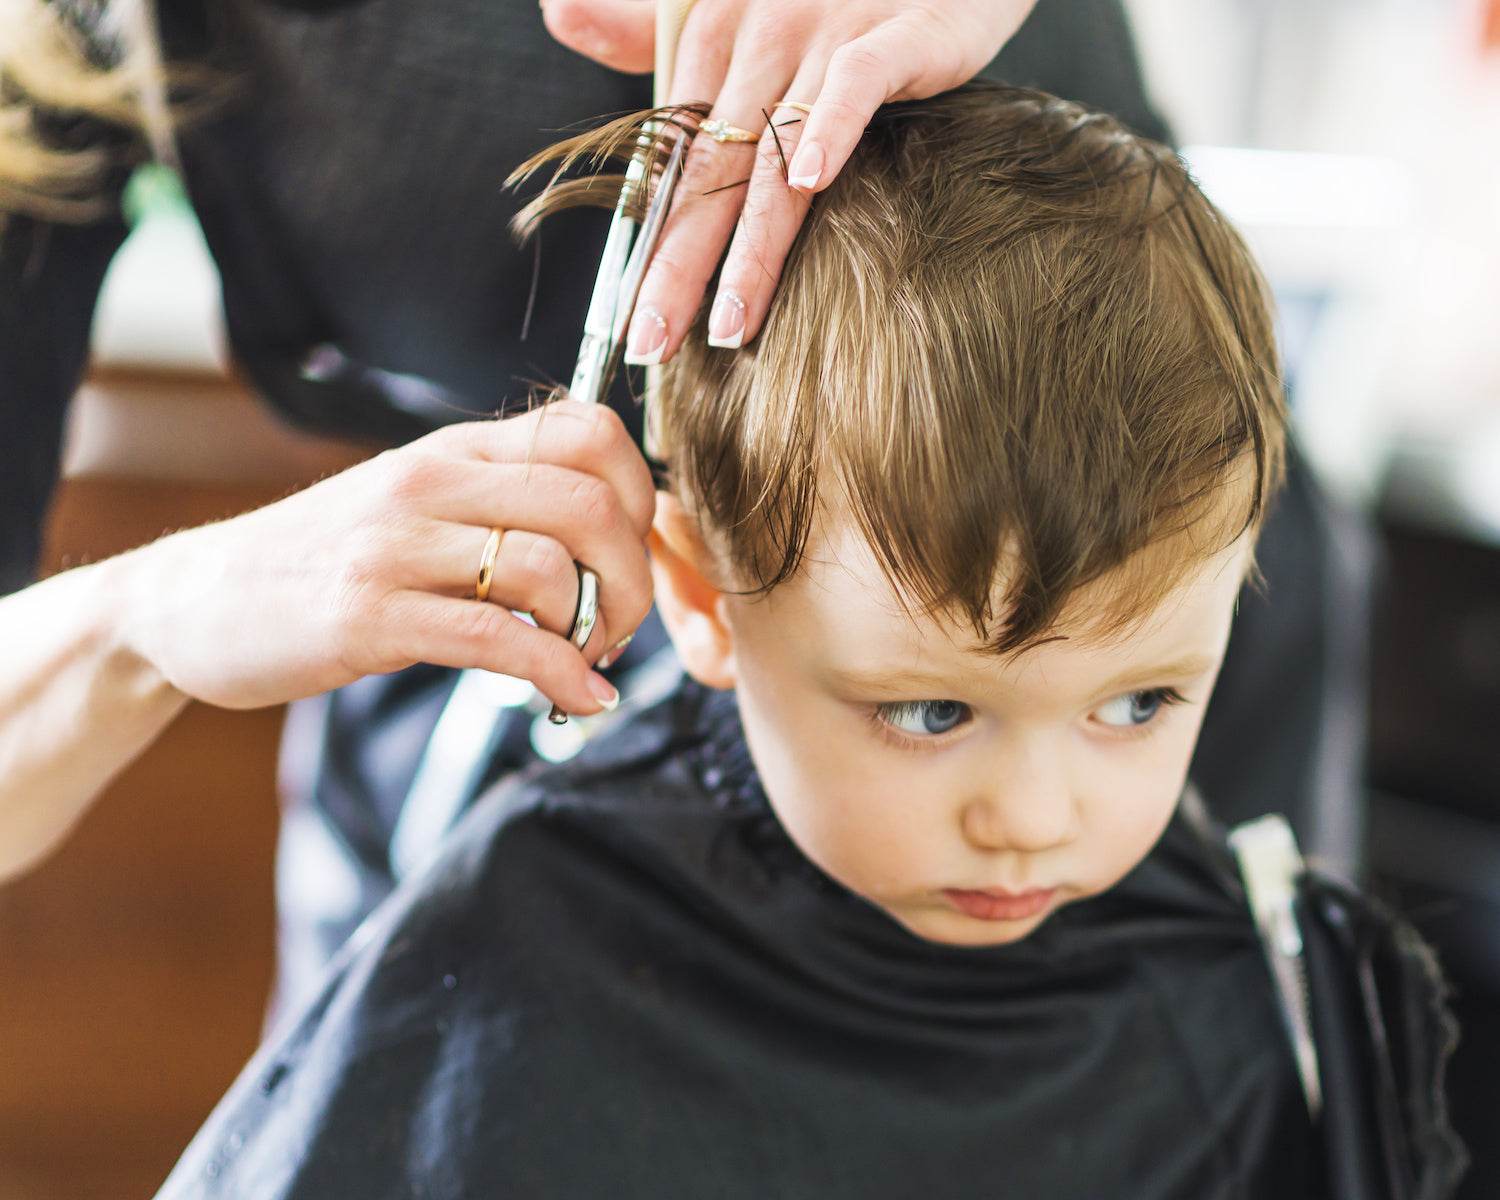 Haircut Tips For Your Child With Behavioral Issues